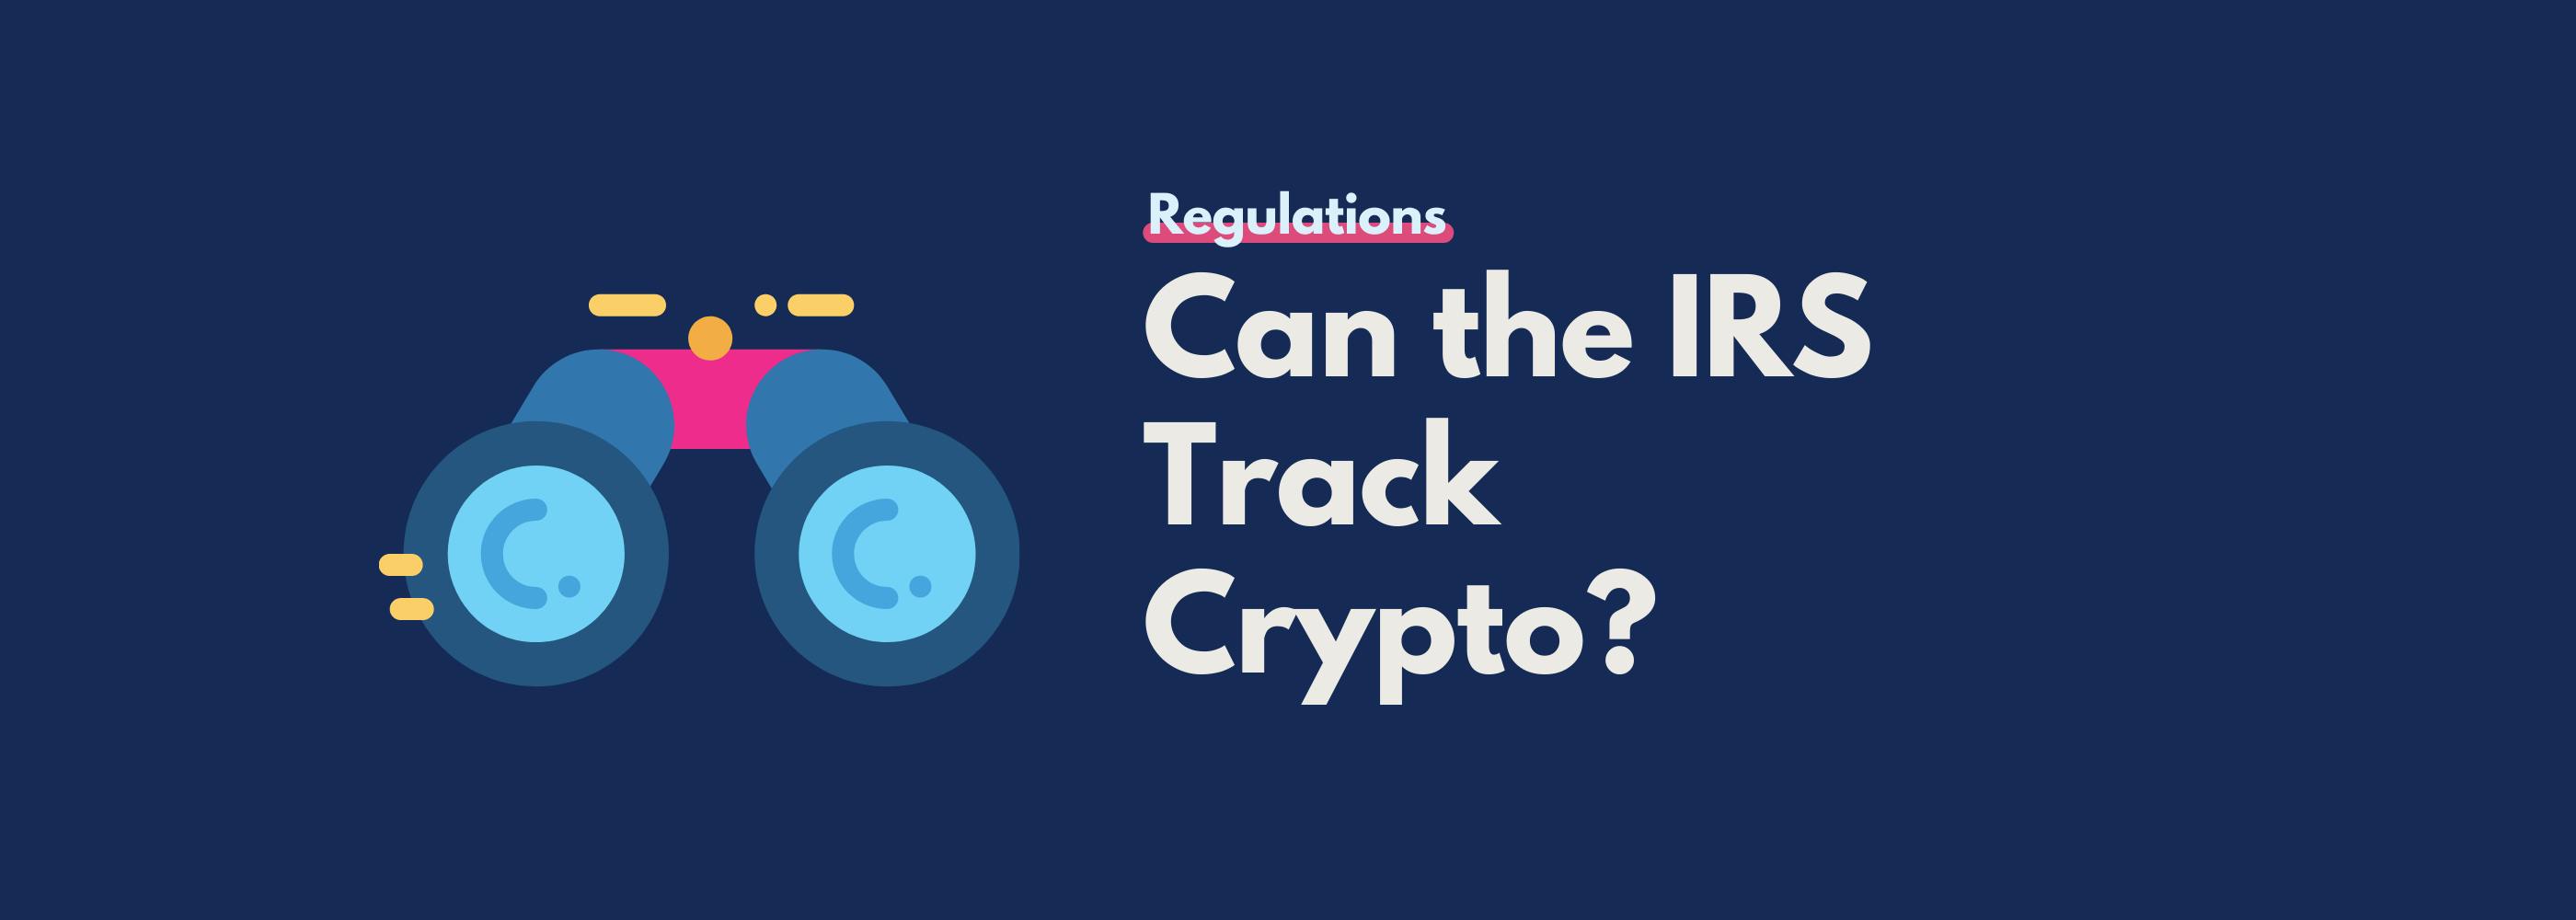 can-the-irs-track-cryptocurrency-koinly